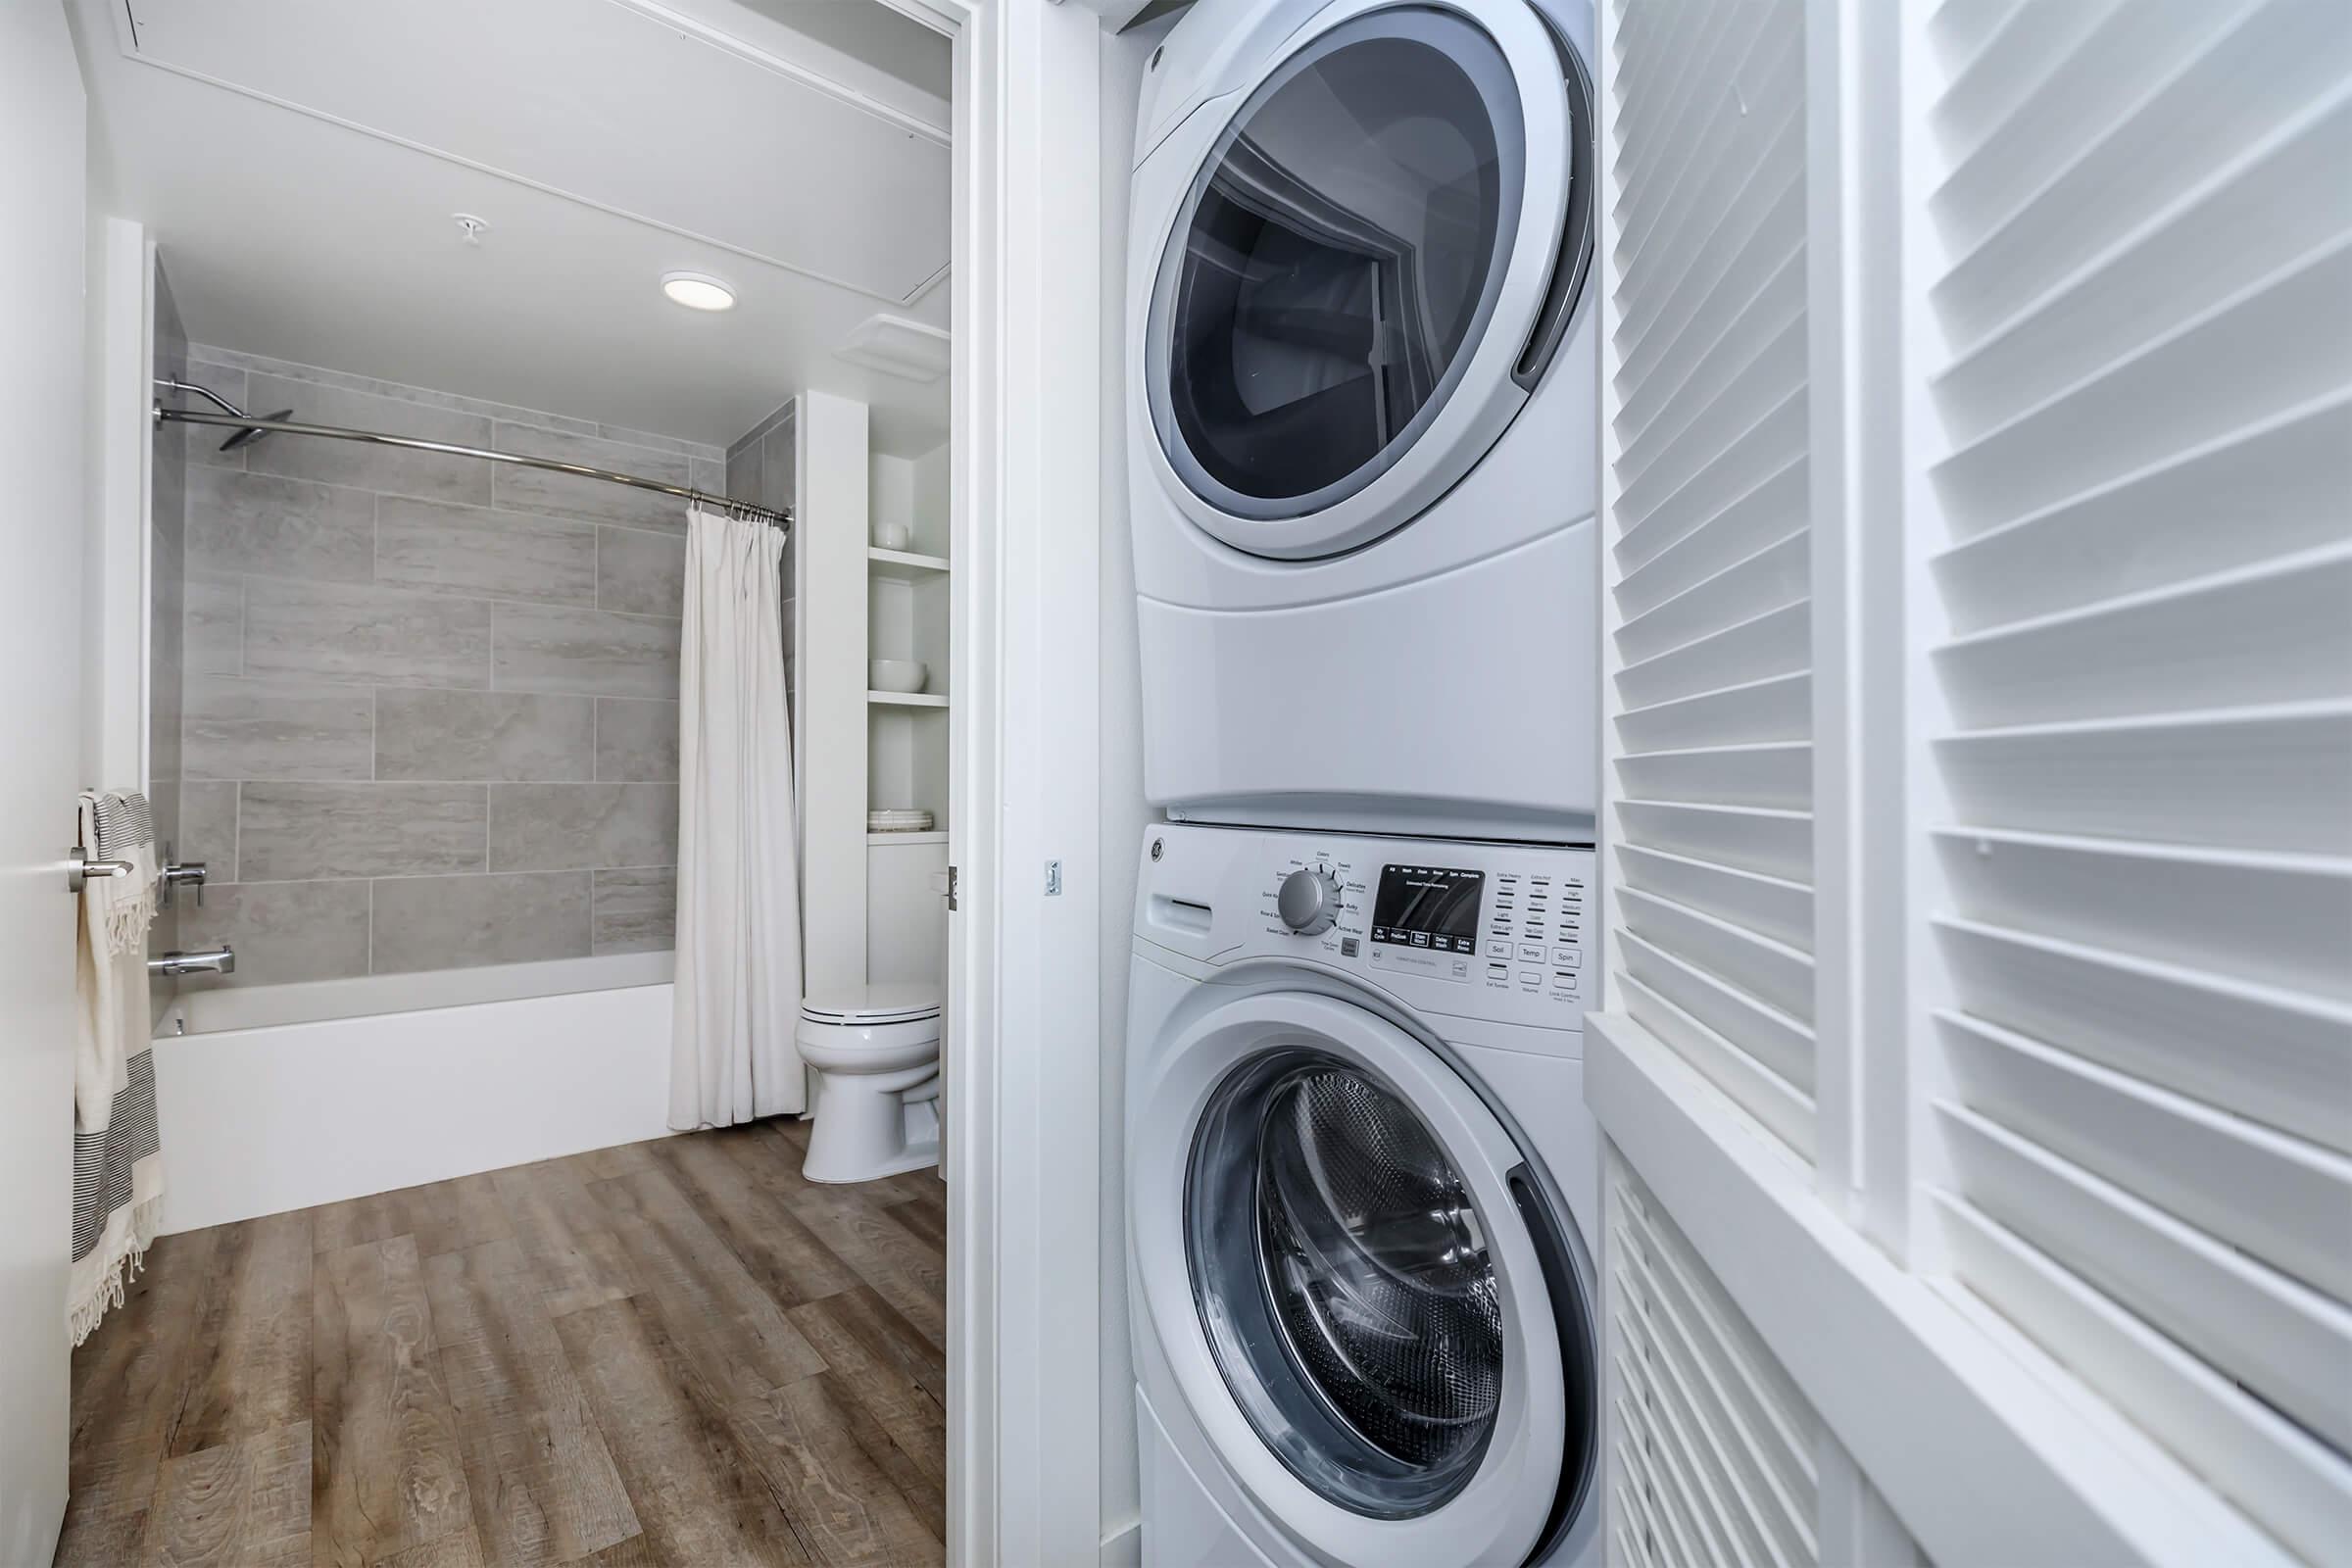 We offer a full-size stacked front loading washer and dryer